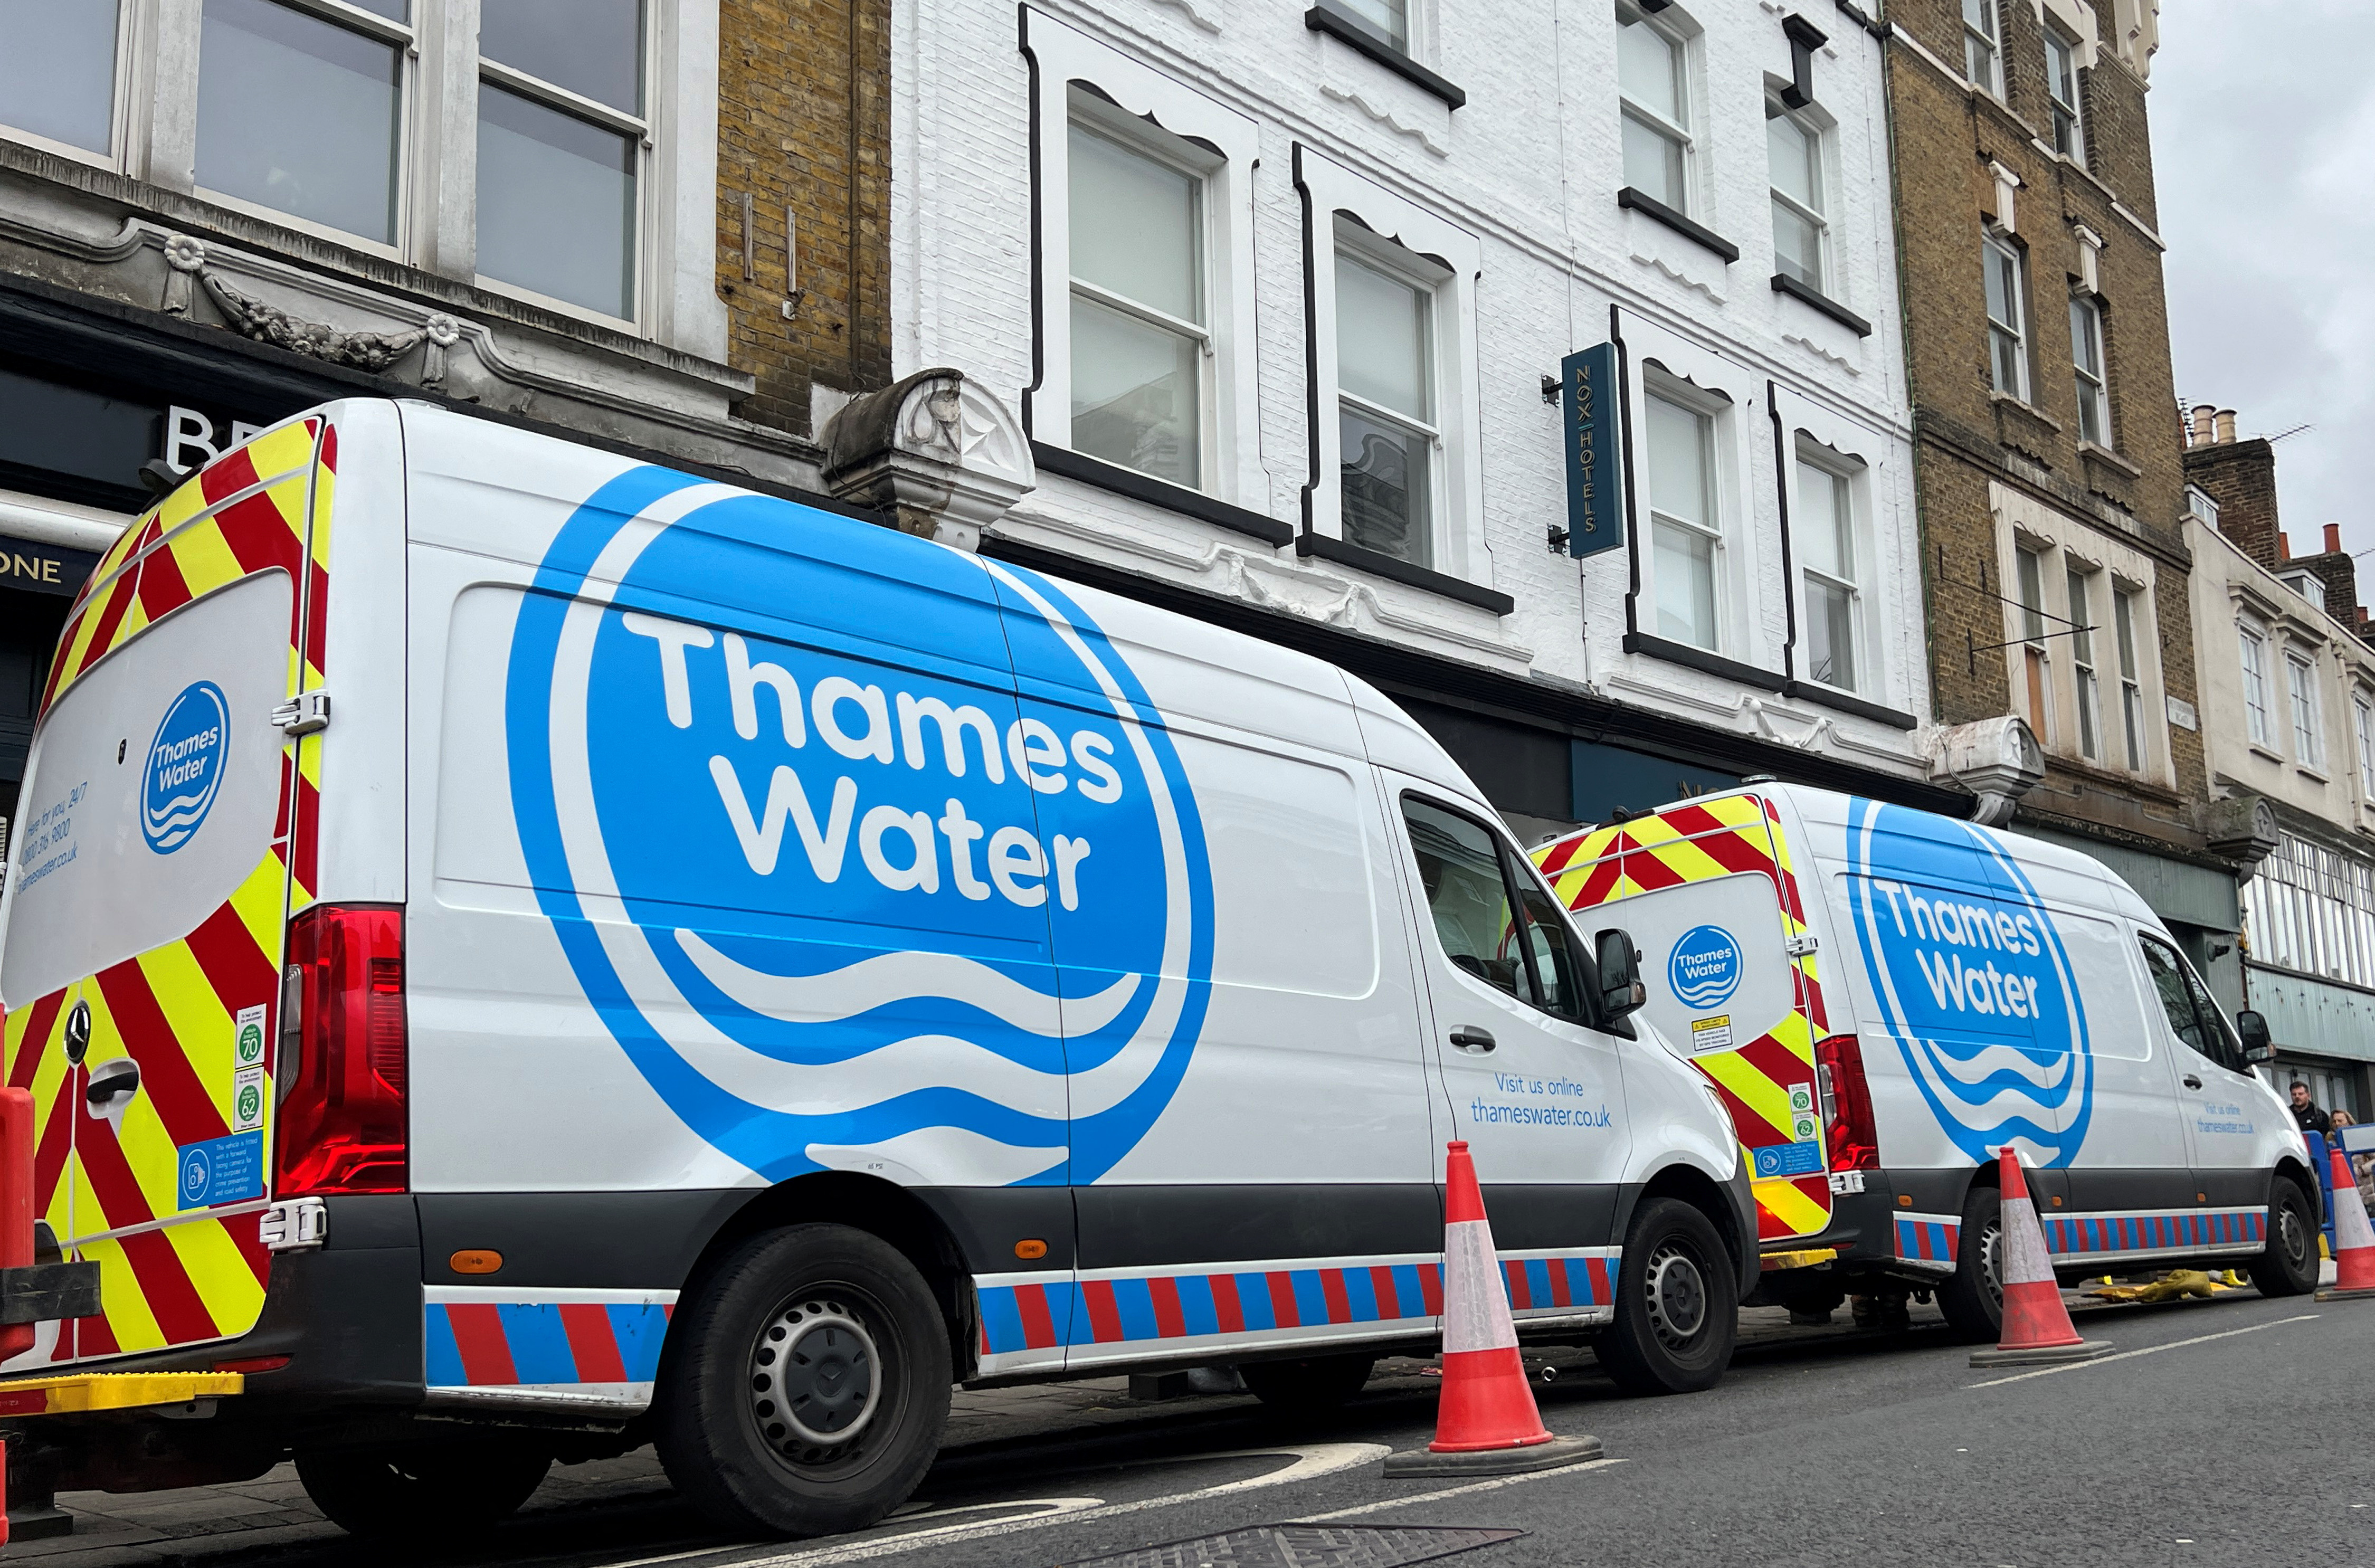 Thames Water vans are parked as repair and maintenance work takes place, in London